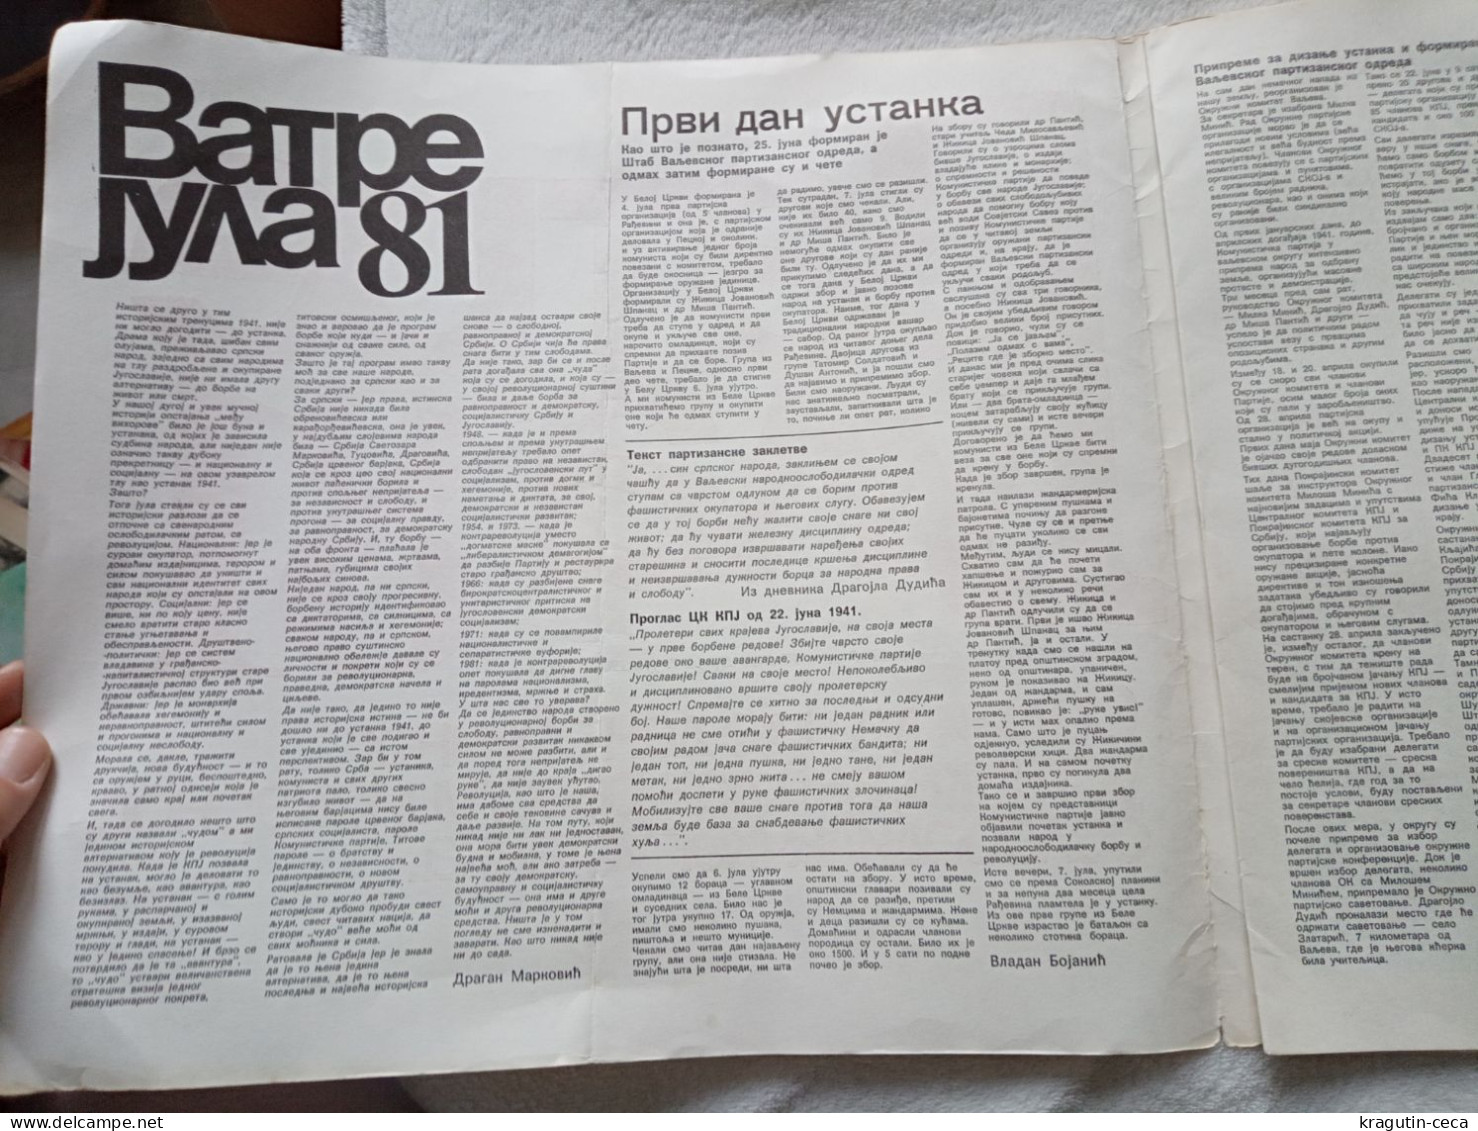 1981 7TH JULY SERBIAN COMMUNISM SOCIALIST MAGAZINE TITO PARTISAN MEMORIAL Day of Uprising Serbia People JOURNAOUX REVUE